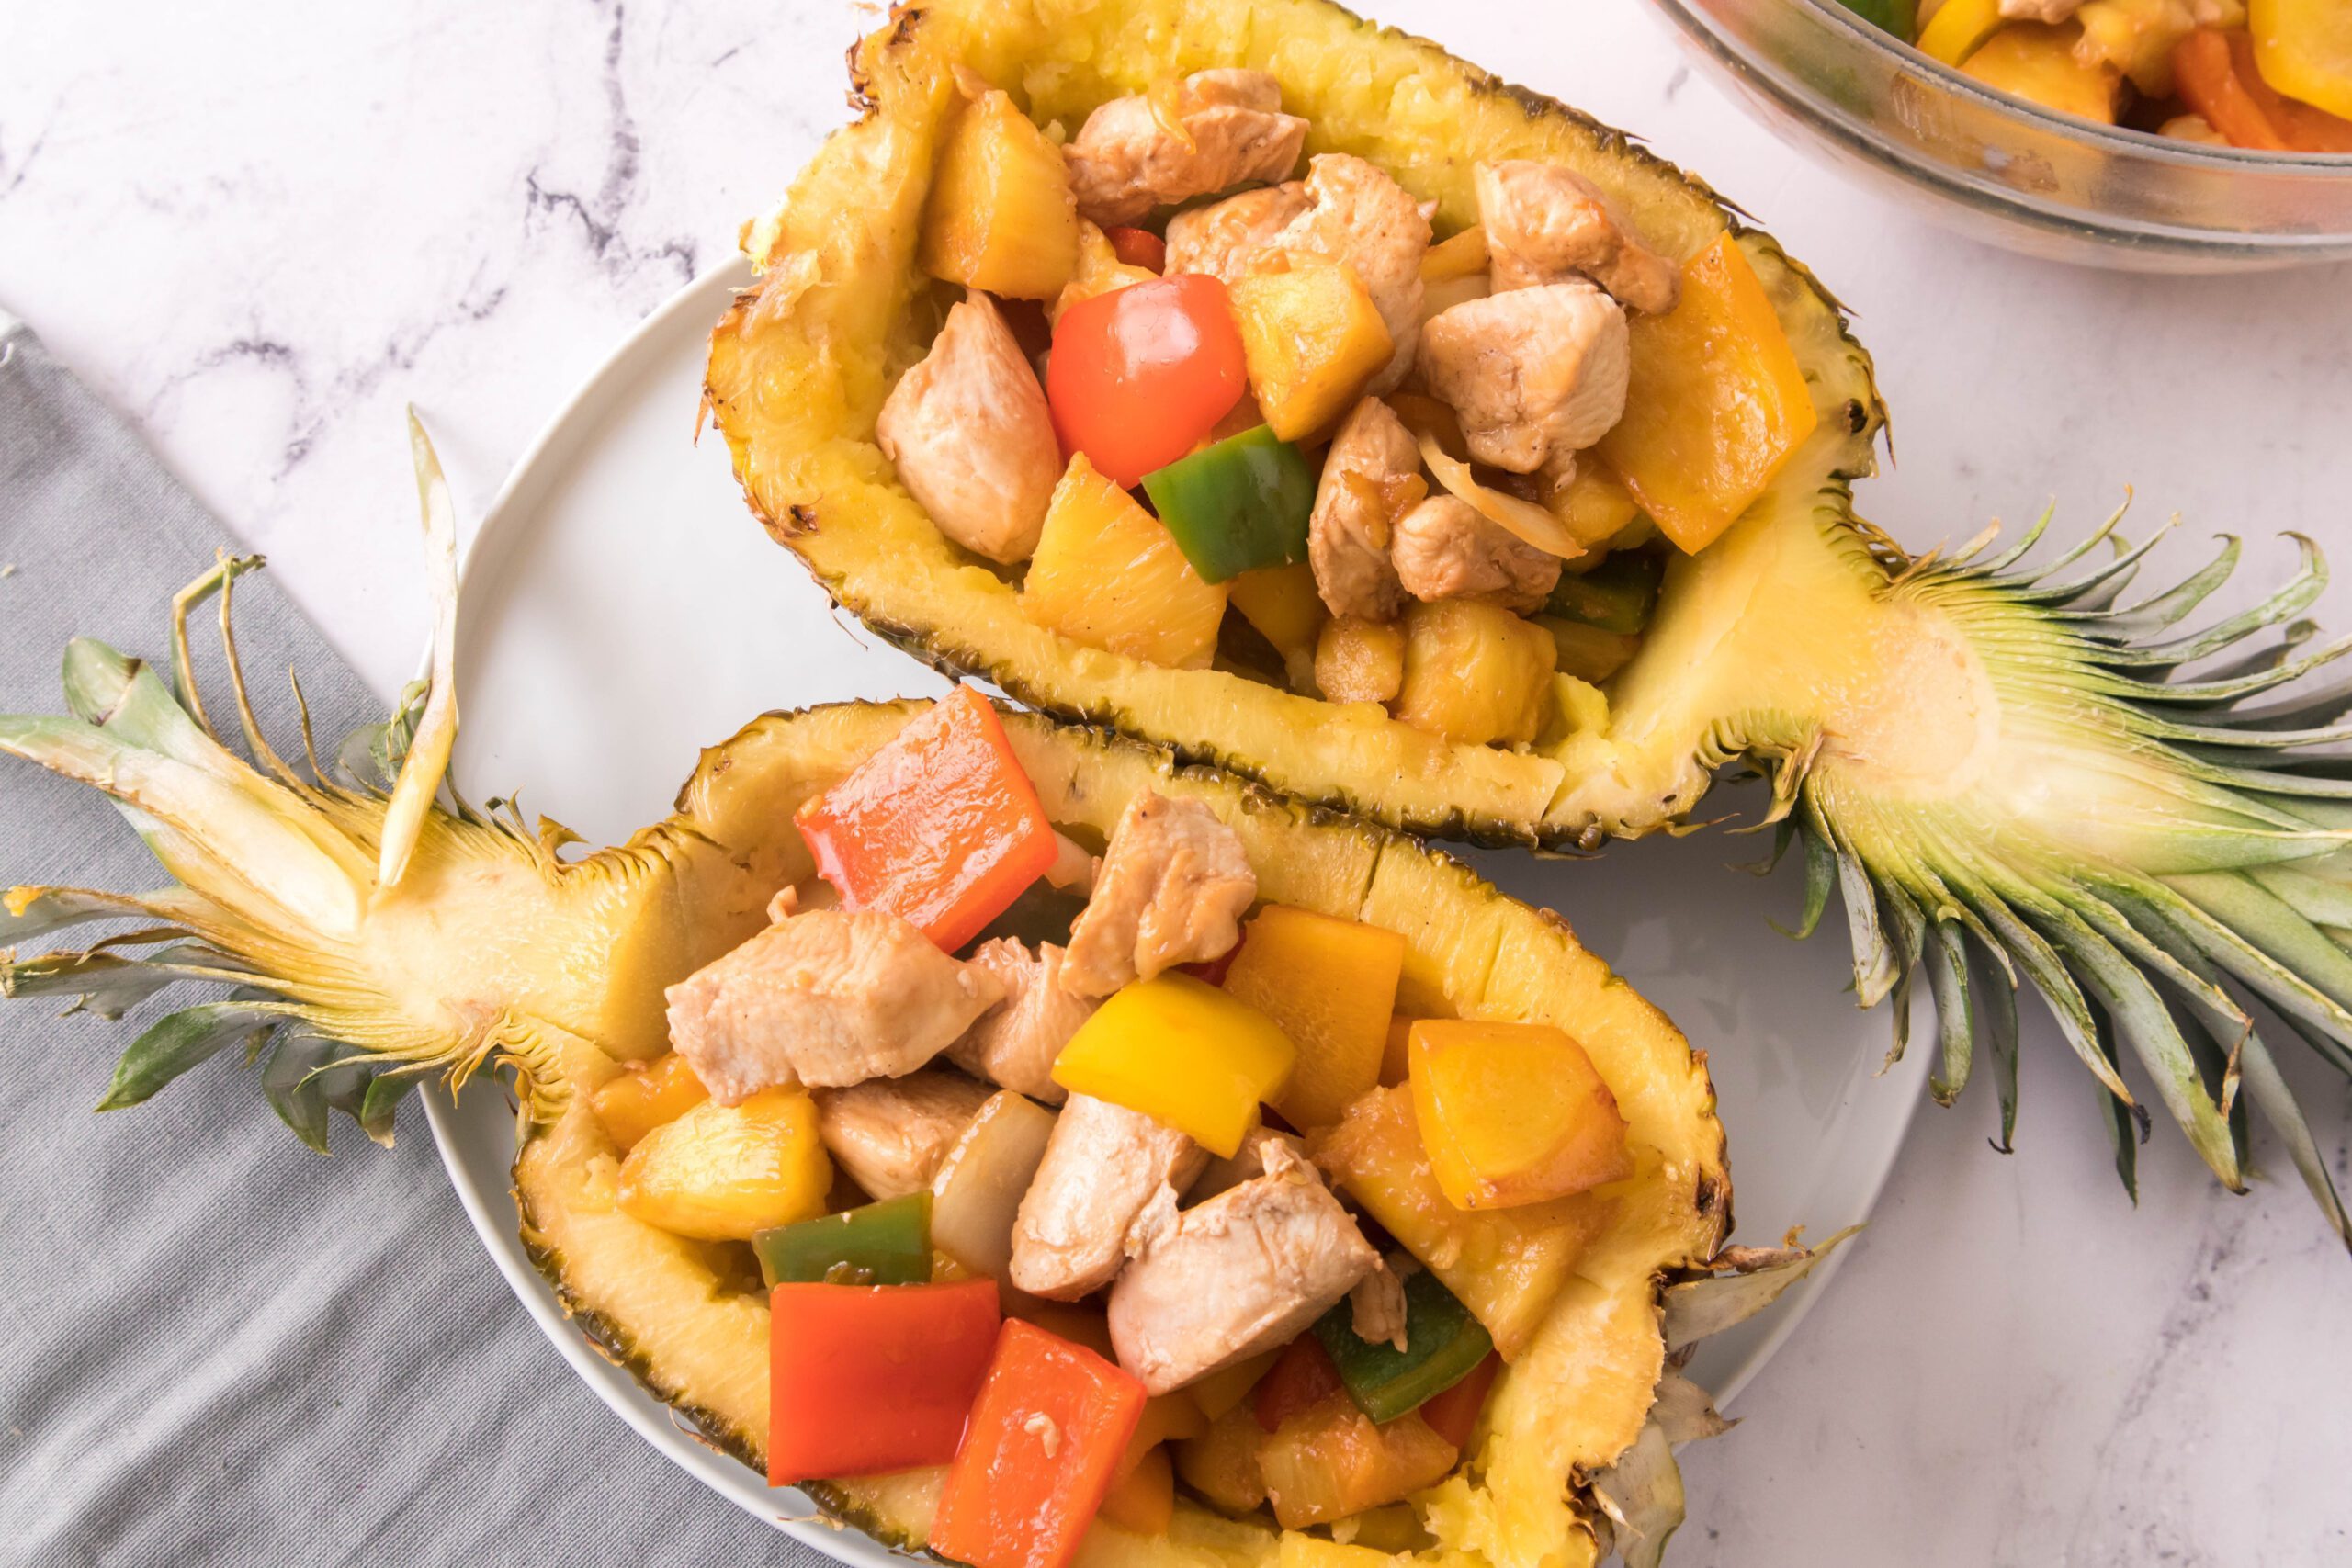 Two Pineapple Bowls filled with chicken and veggies